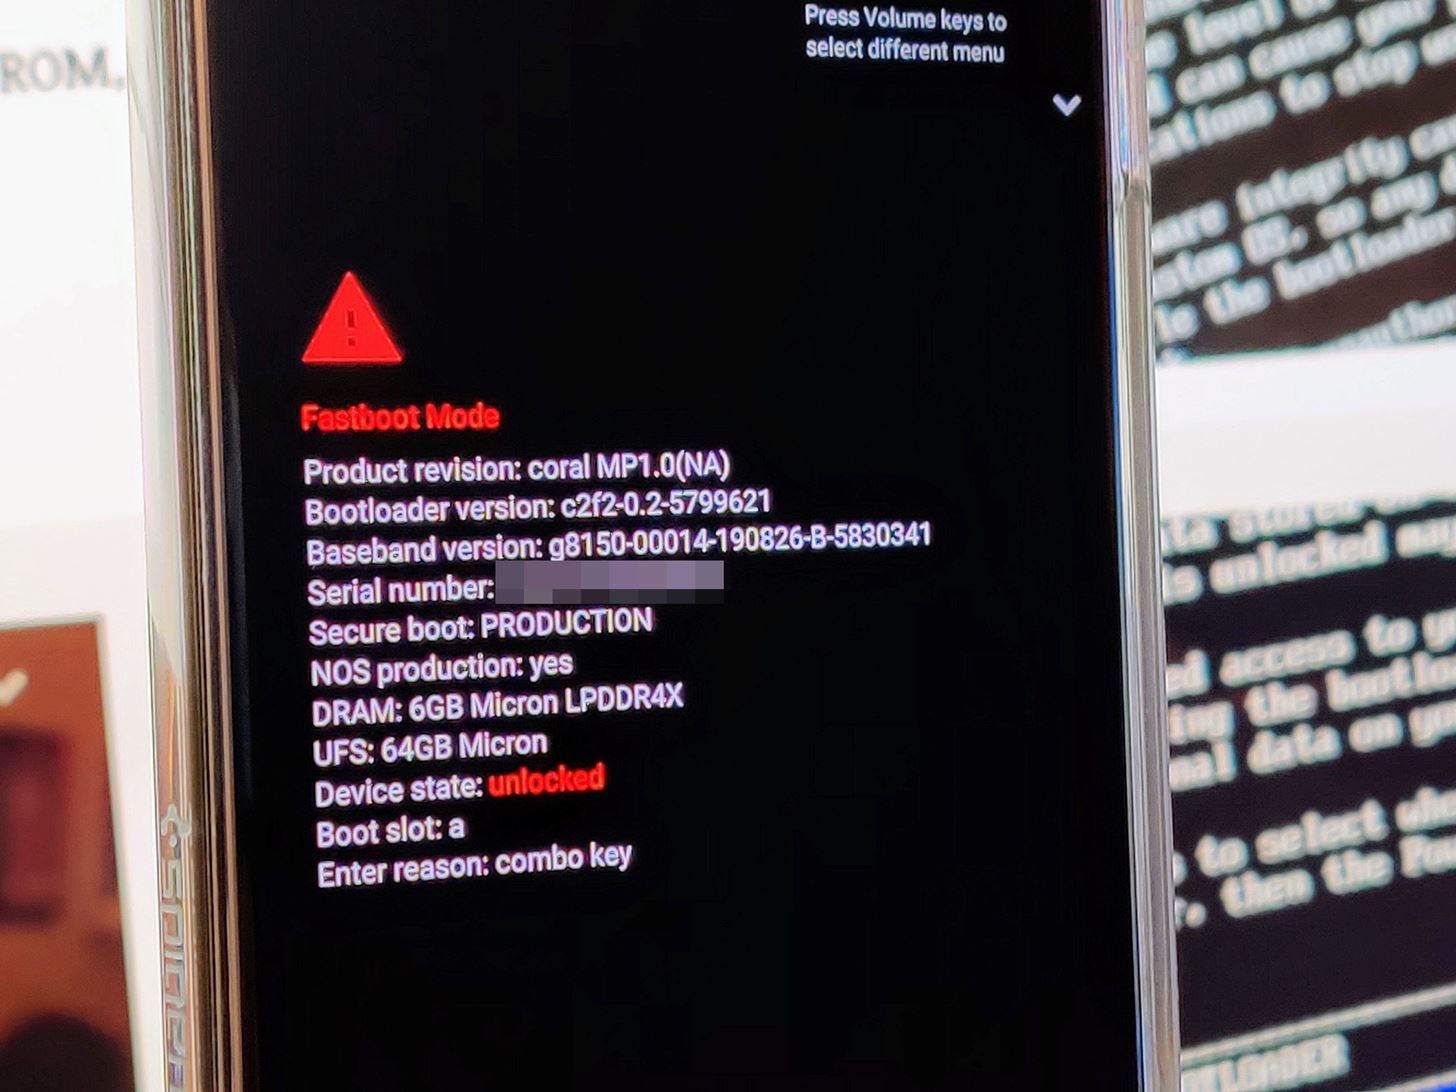 How to Install TWRP Recovery on Your Pixel 4 or 4 XL